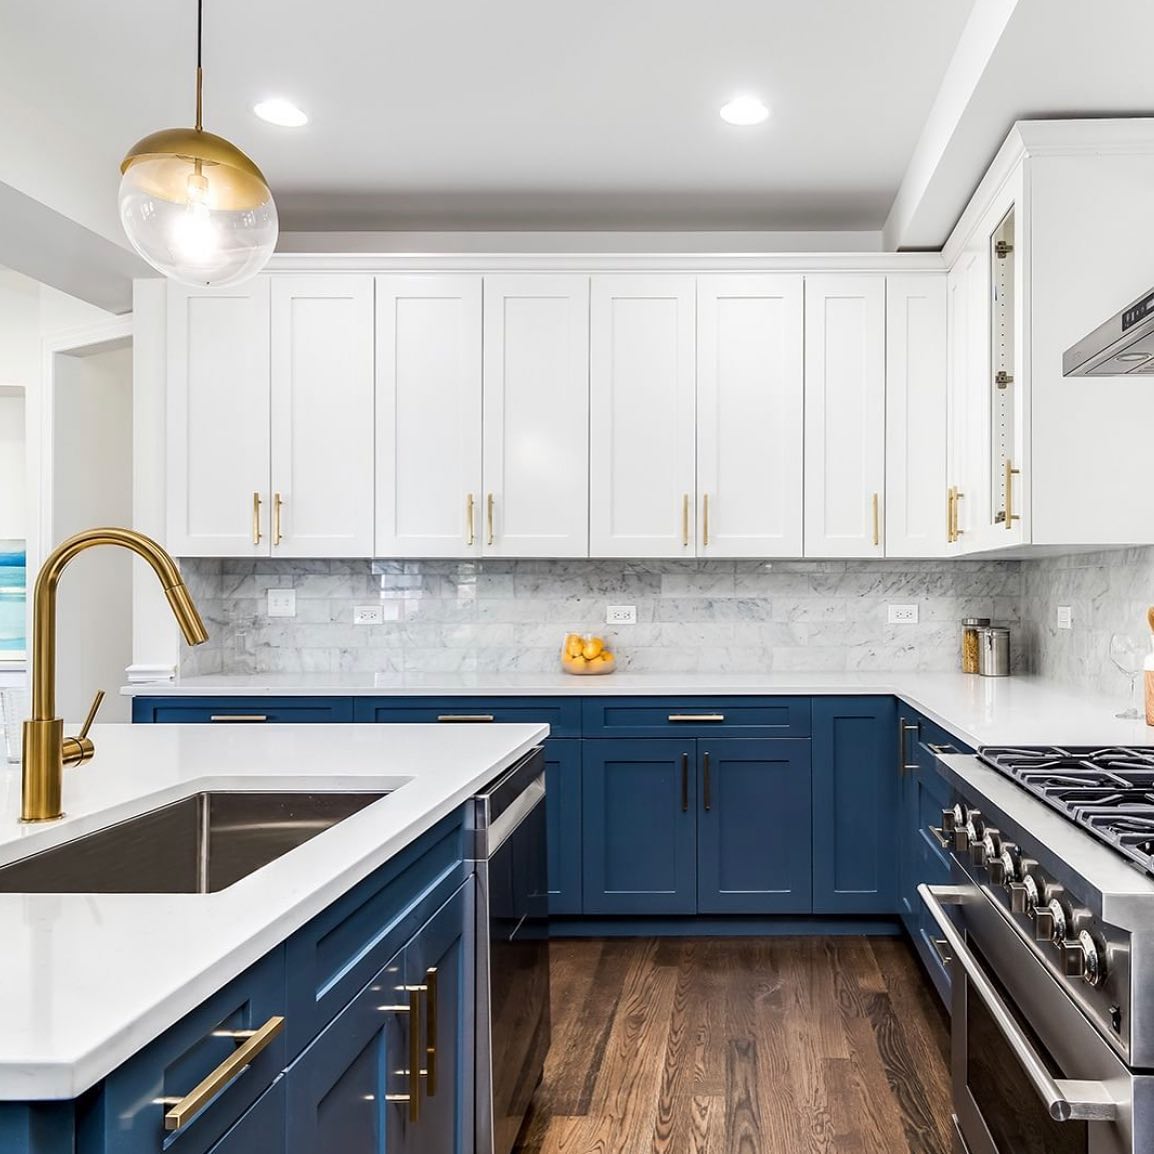 White upper cabinets and blue lower cabinets. Photo by Instagram user @512lifestyle